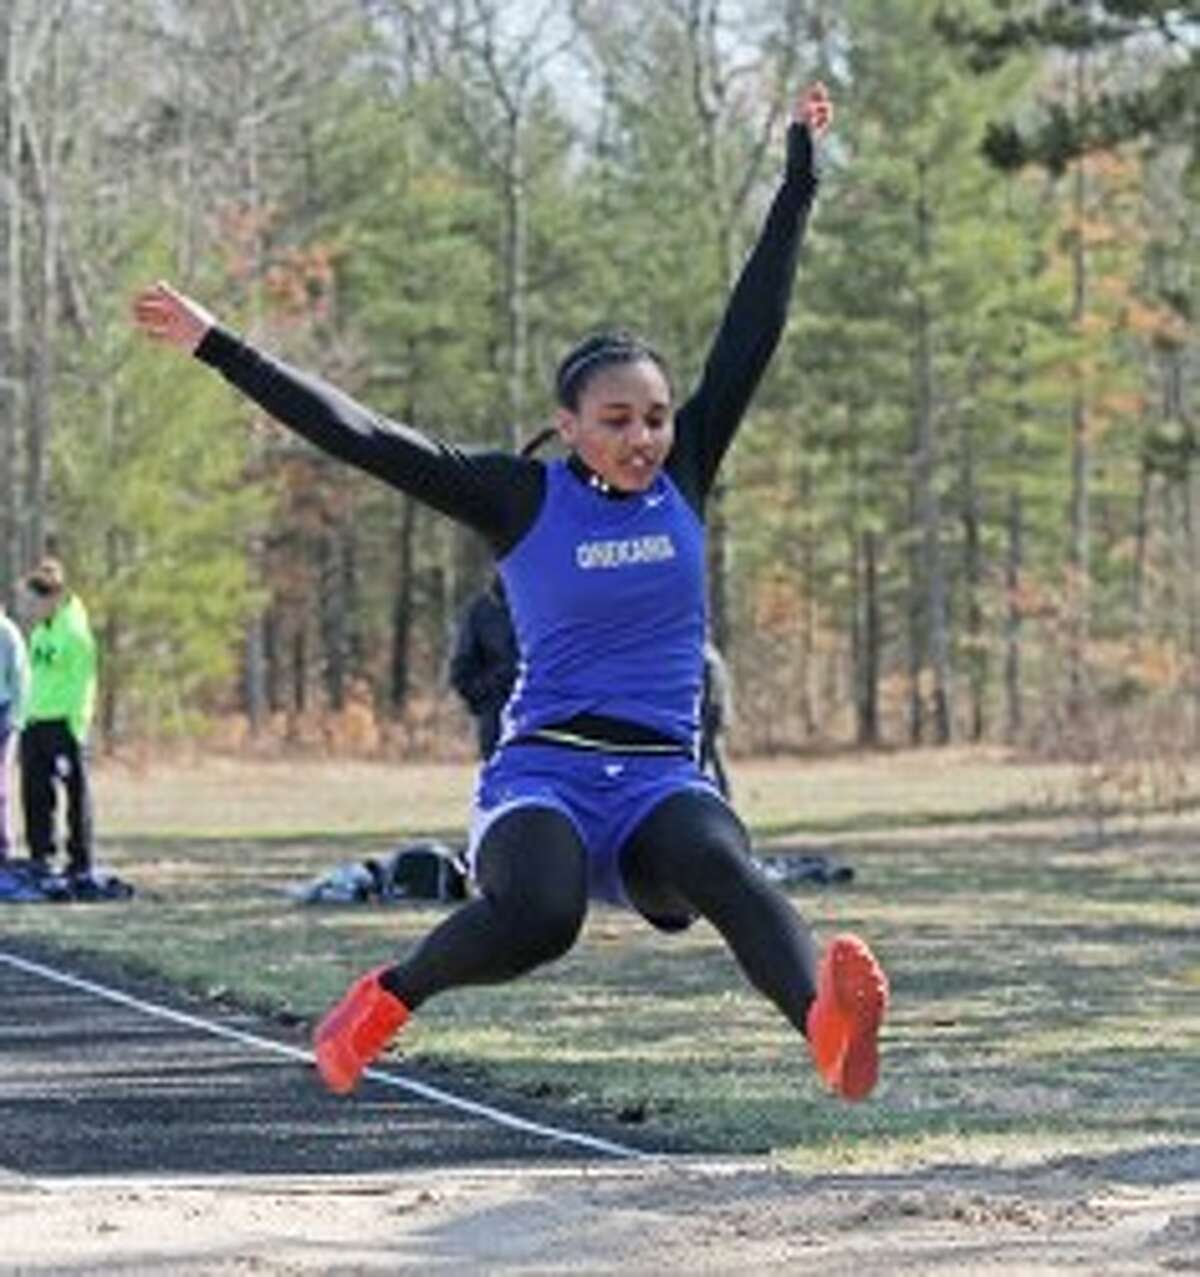 Onekama’s Nisha Collins won the long jump in Wednesday’s West Michigan D League jamboree at Brethren as the Portager boys and girls both won. (Dylan Savela/News Advocate)